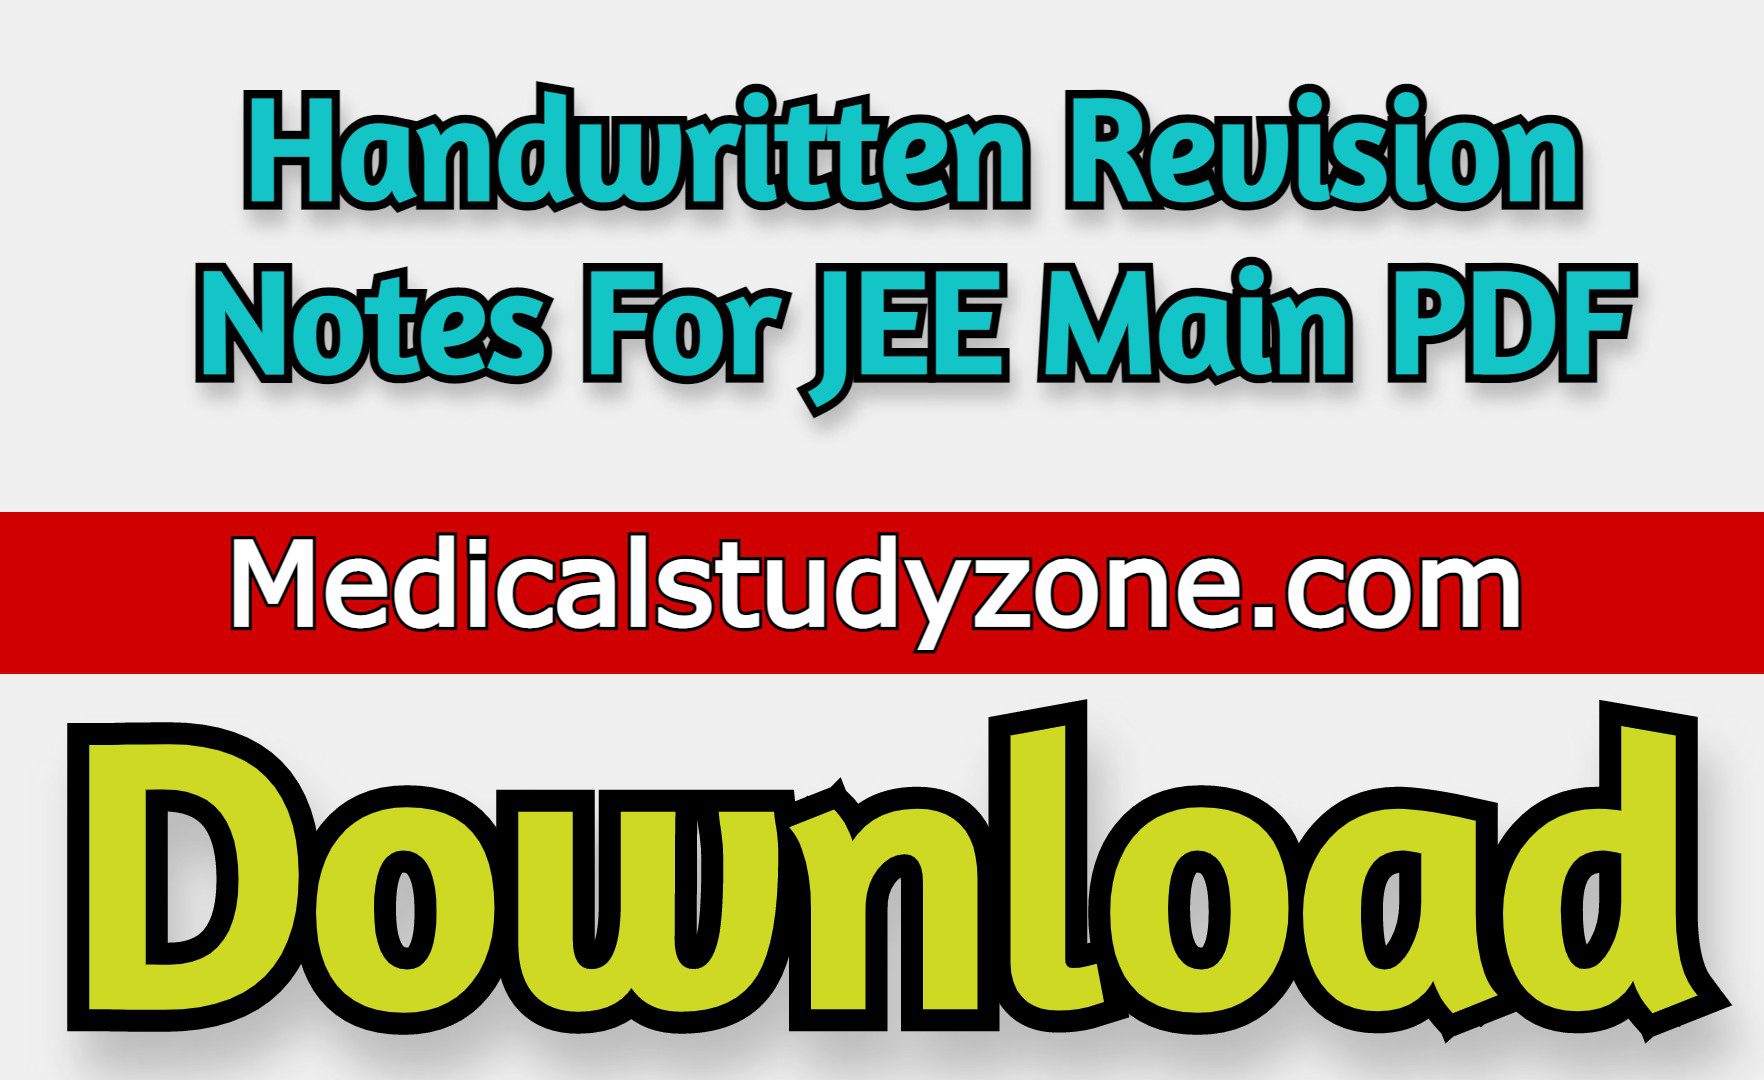 Handwritten Revision Notes For JEE Main 2021 PDF Free Download